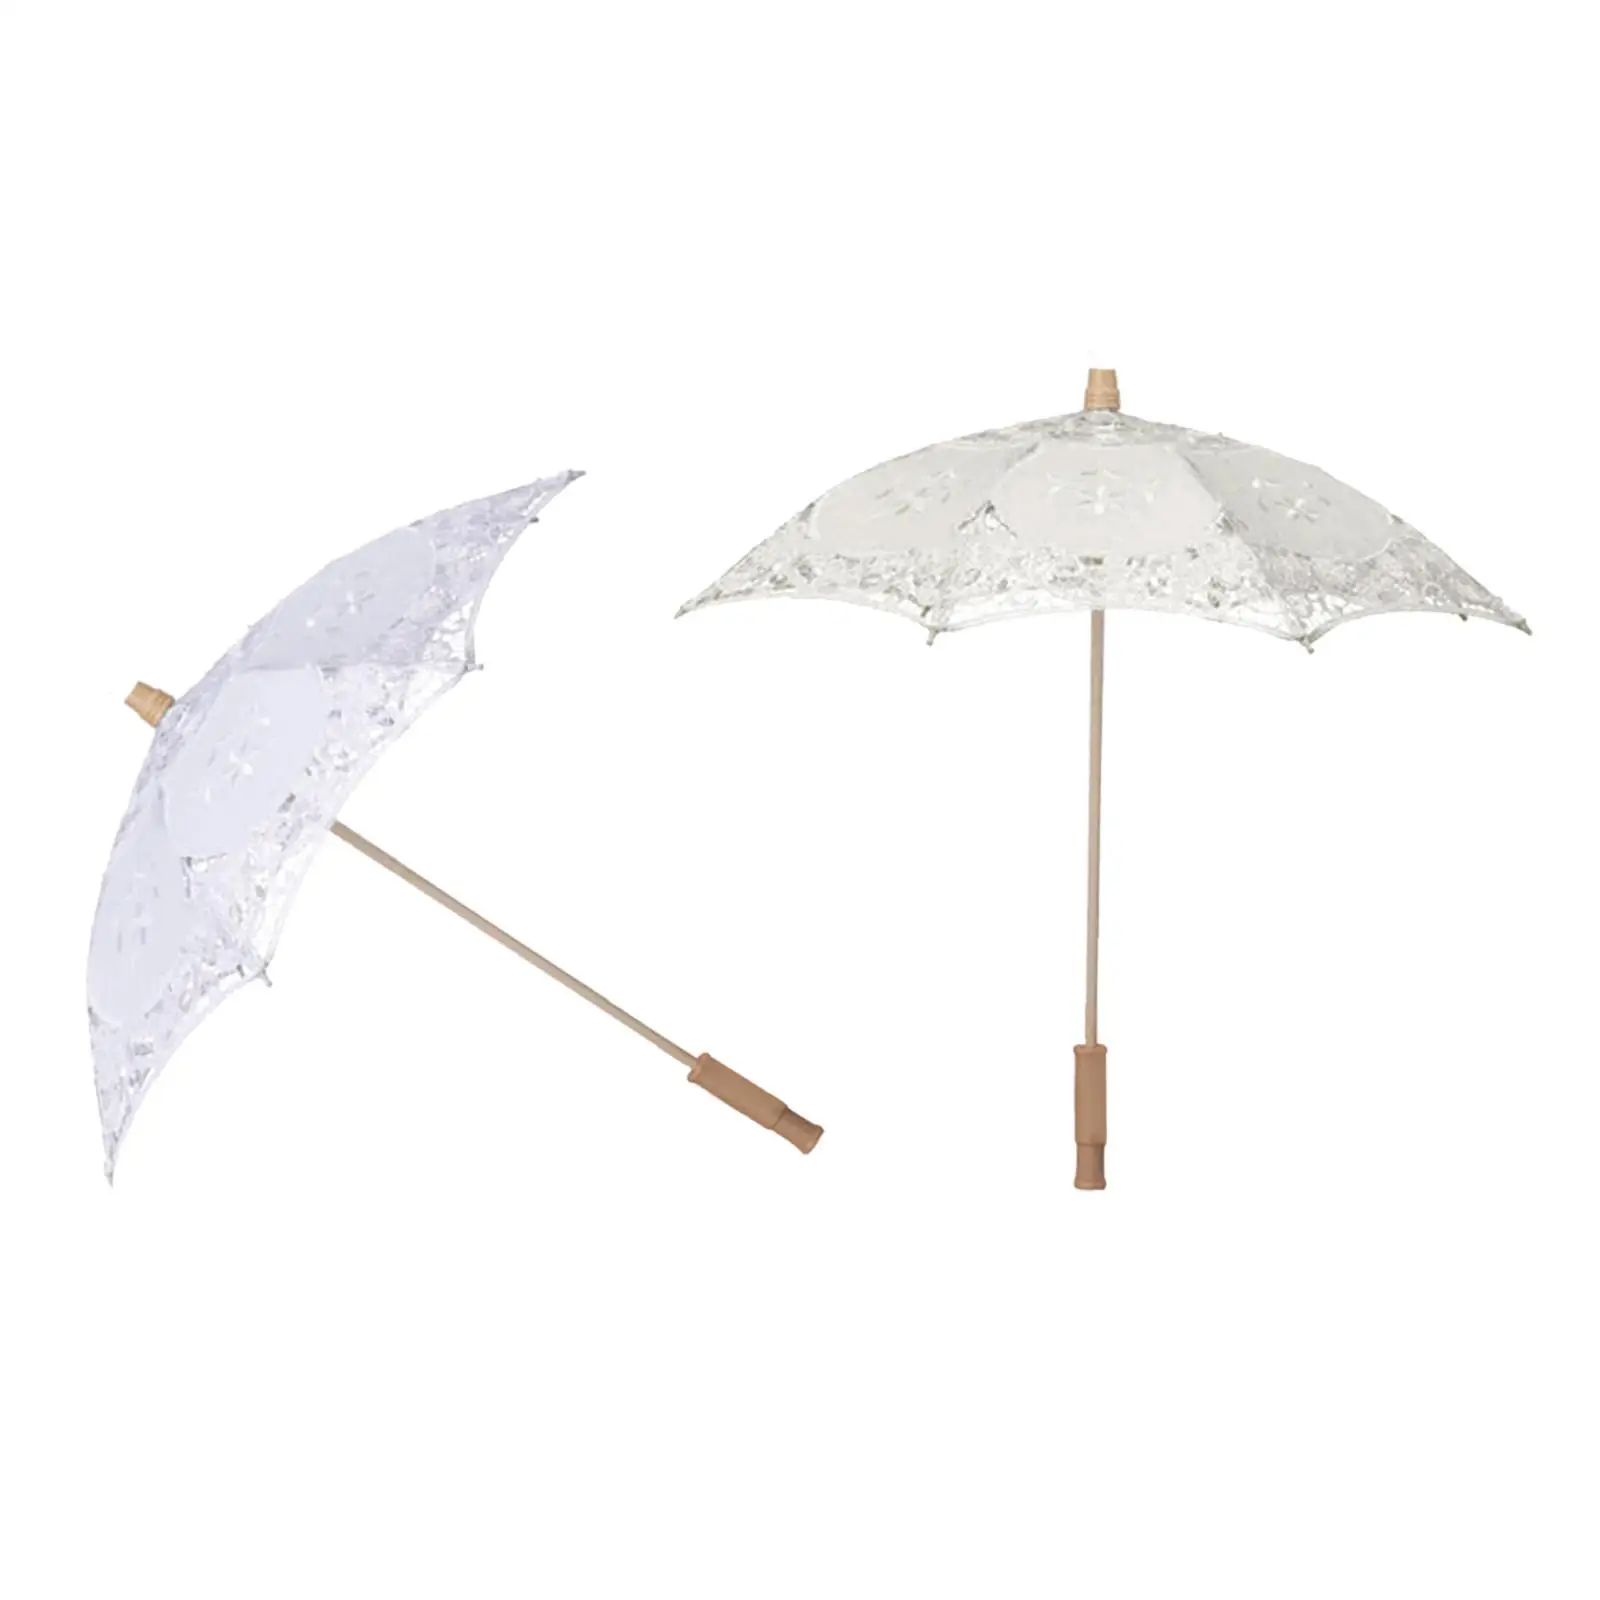 Lace Umbrella Fashion Wooden Handle Photography Umbrella for Women Wedding Party Photo Props Lady Costume Accessory